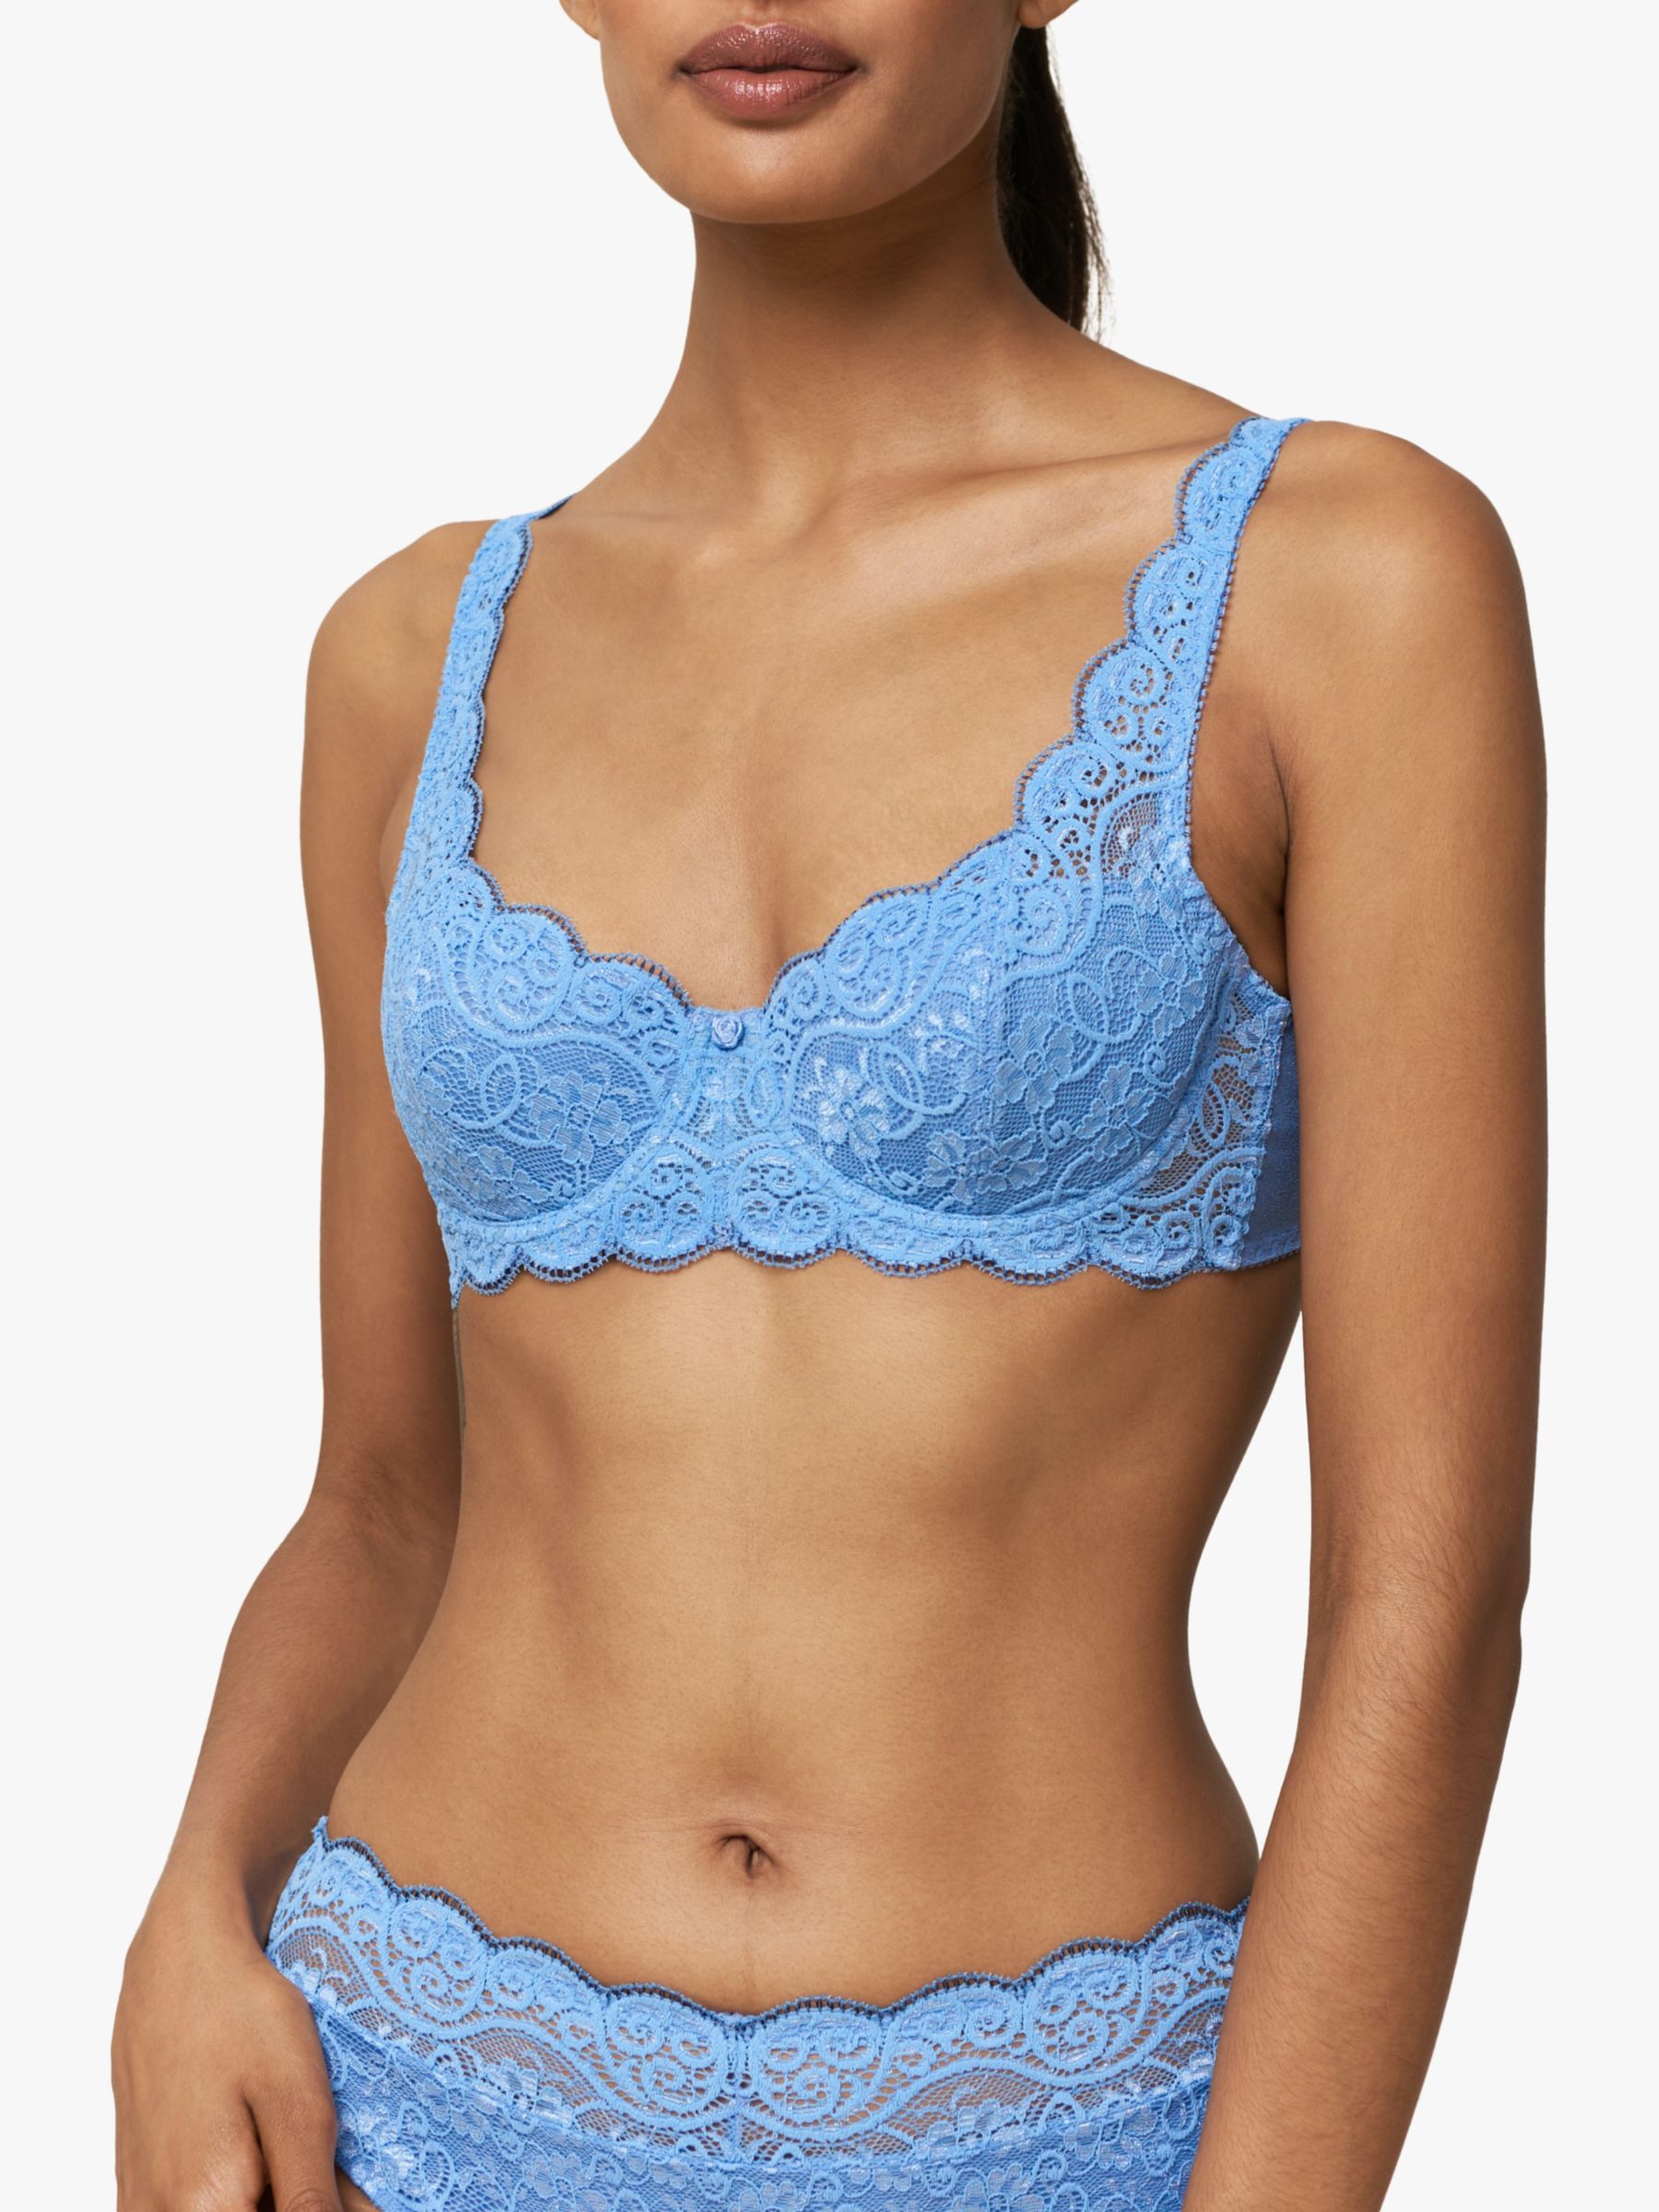 Triumph Amourette 300 Padded Underwired Bra, Provence, 32A